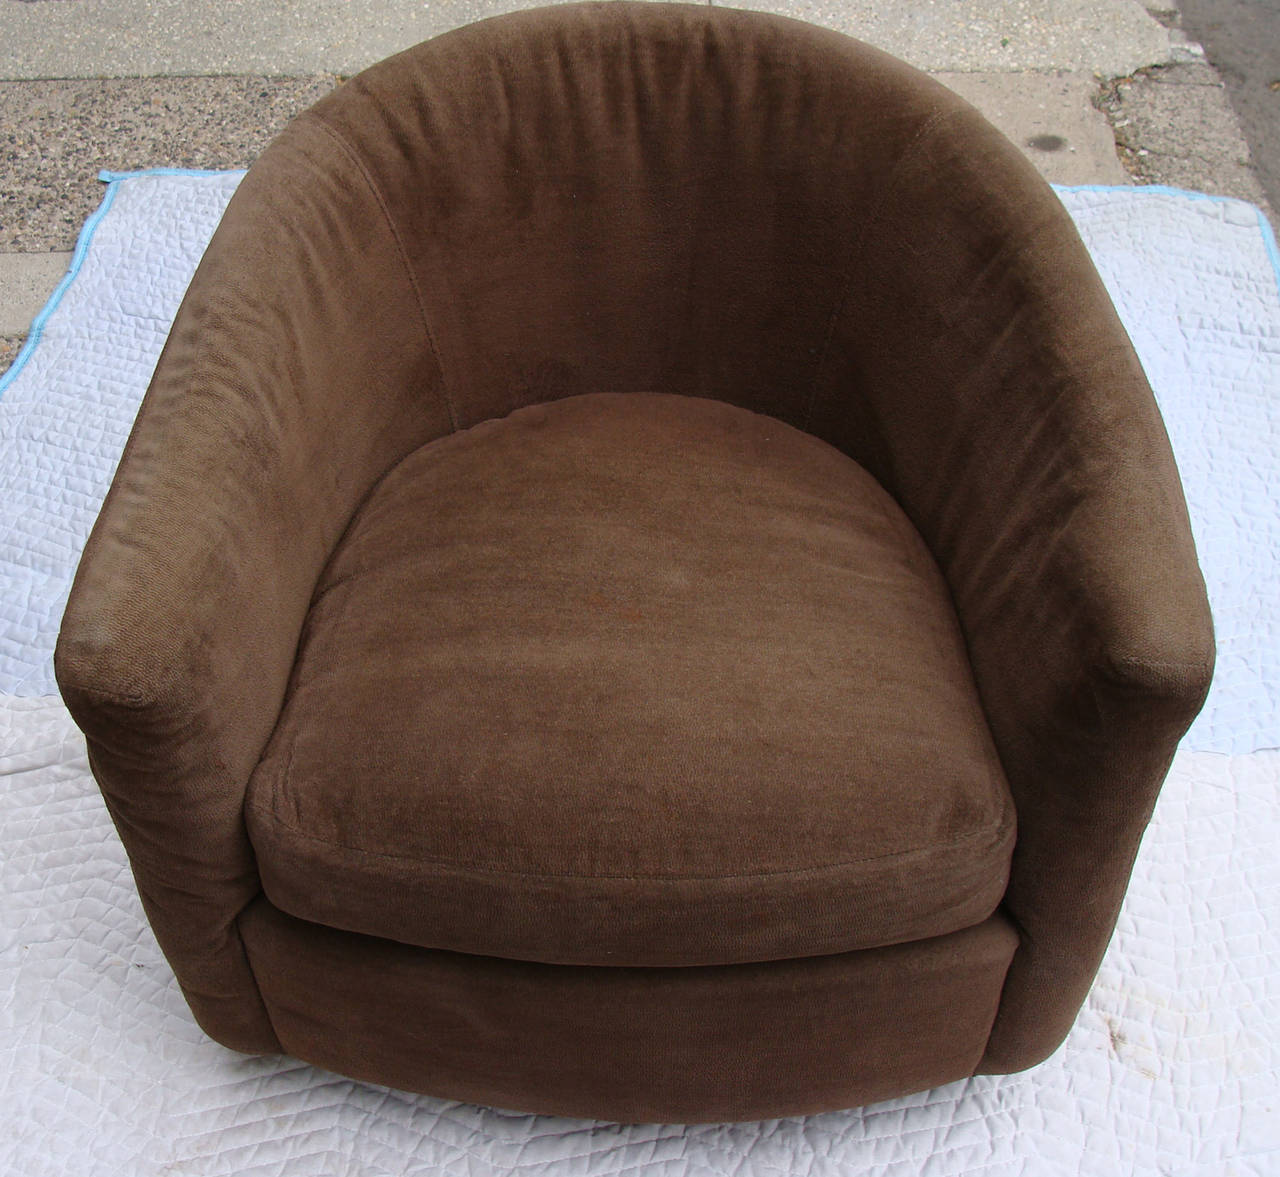 This pair of retains original fabric and is an excellent candidate for re-upholstering.

Swivel or tilt mechanism in excellent working order.

Retains original Thayer-Coggin label.